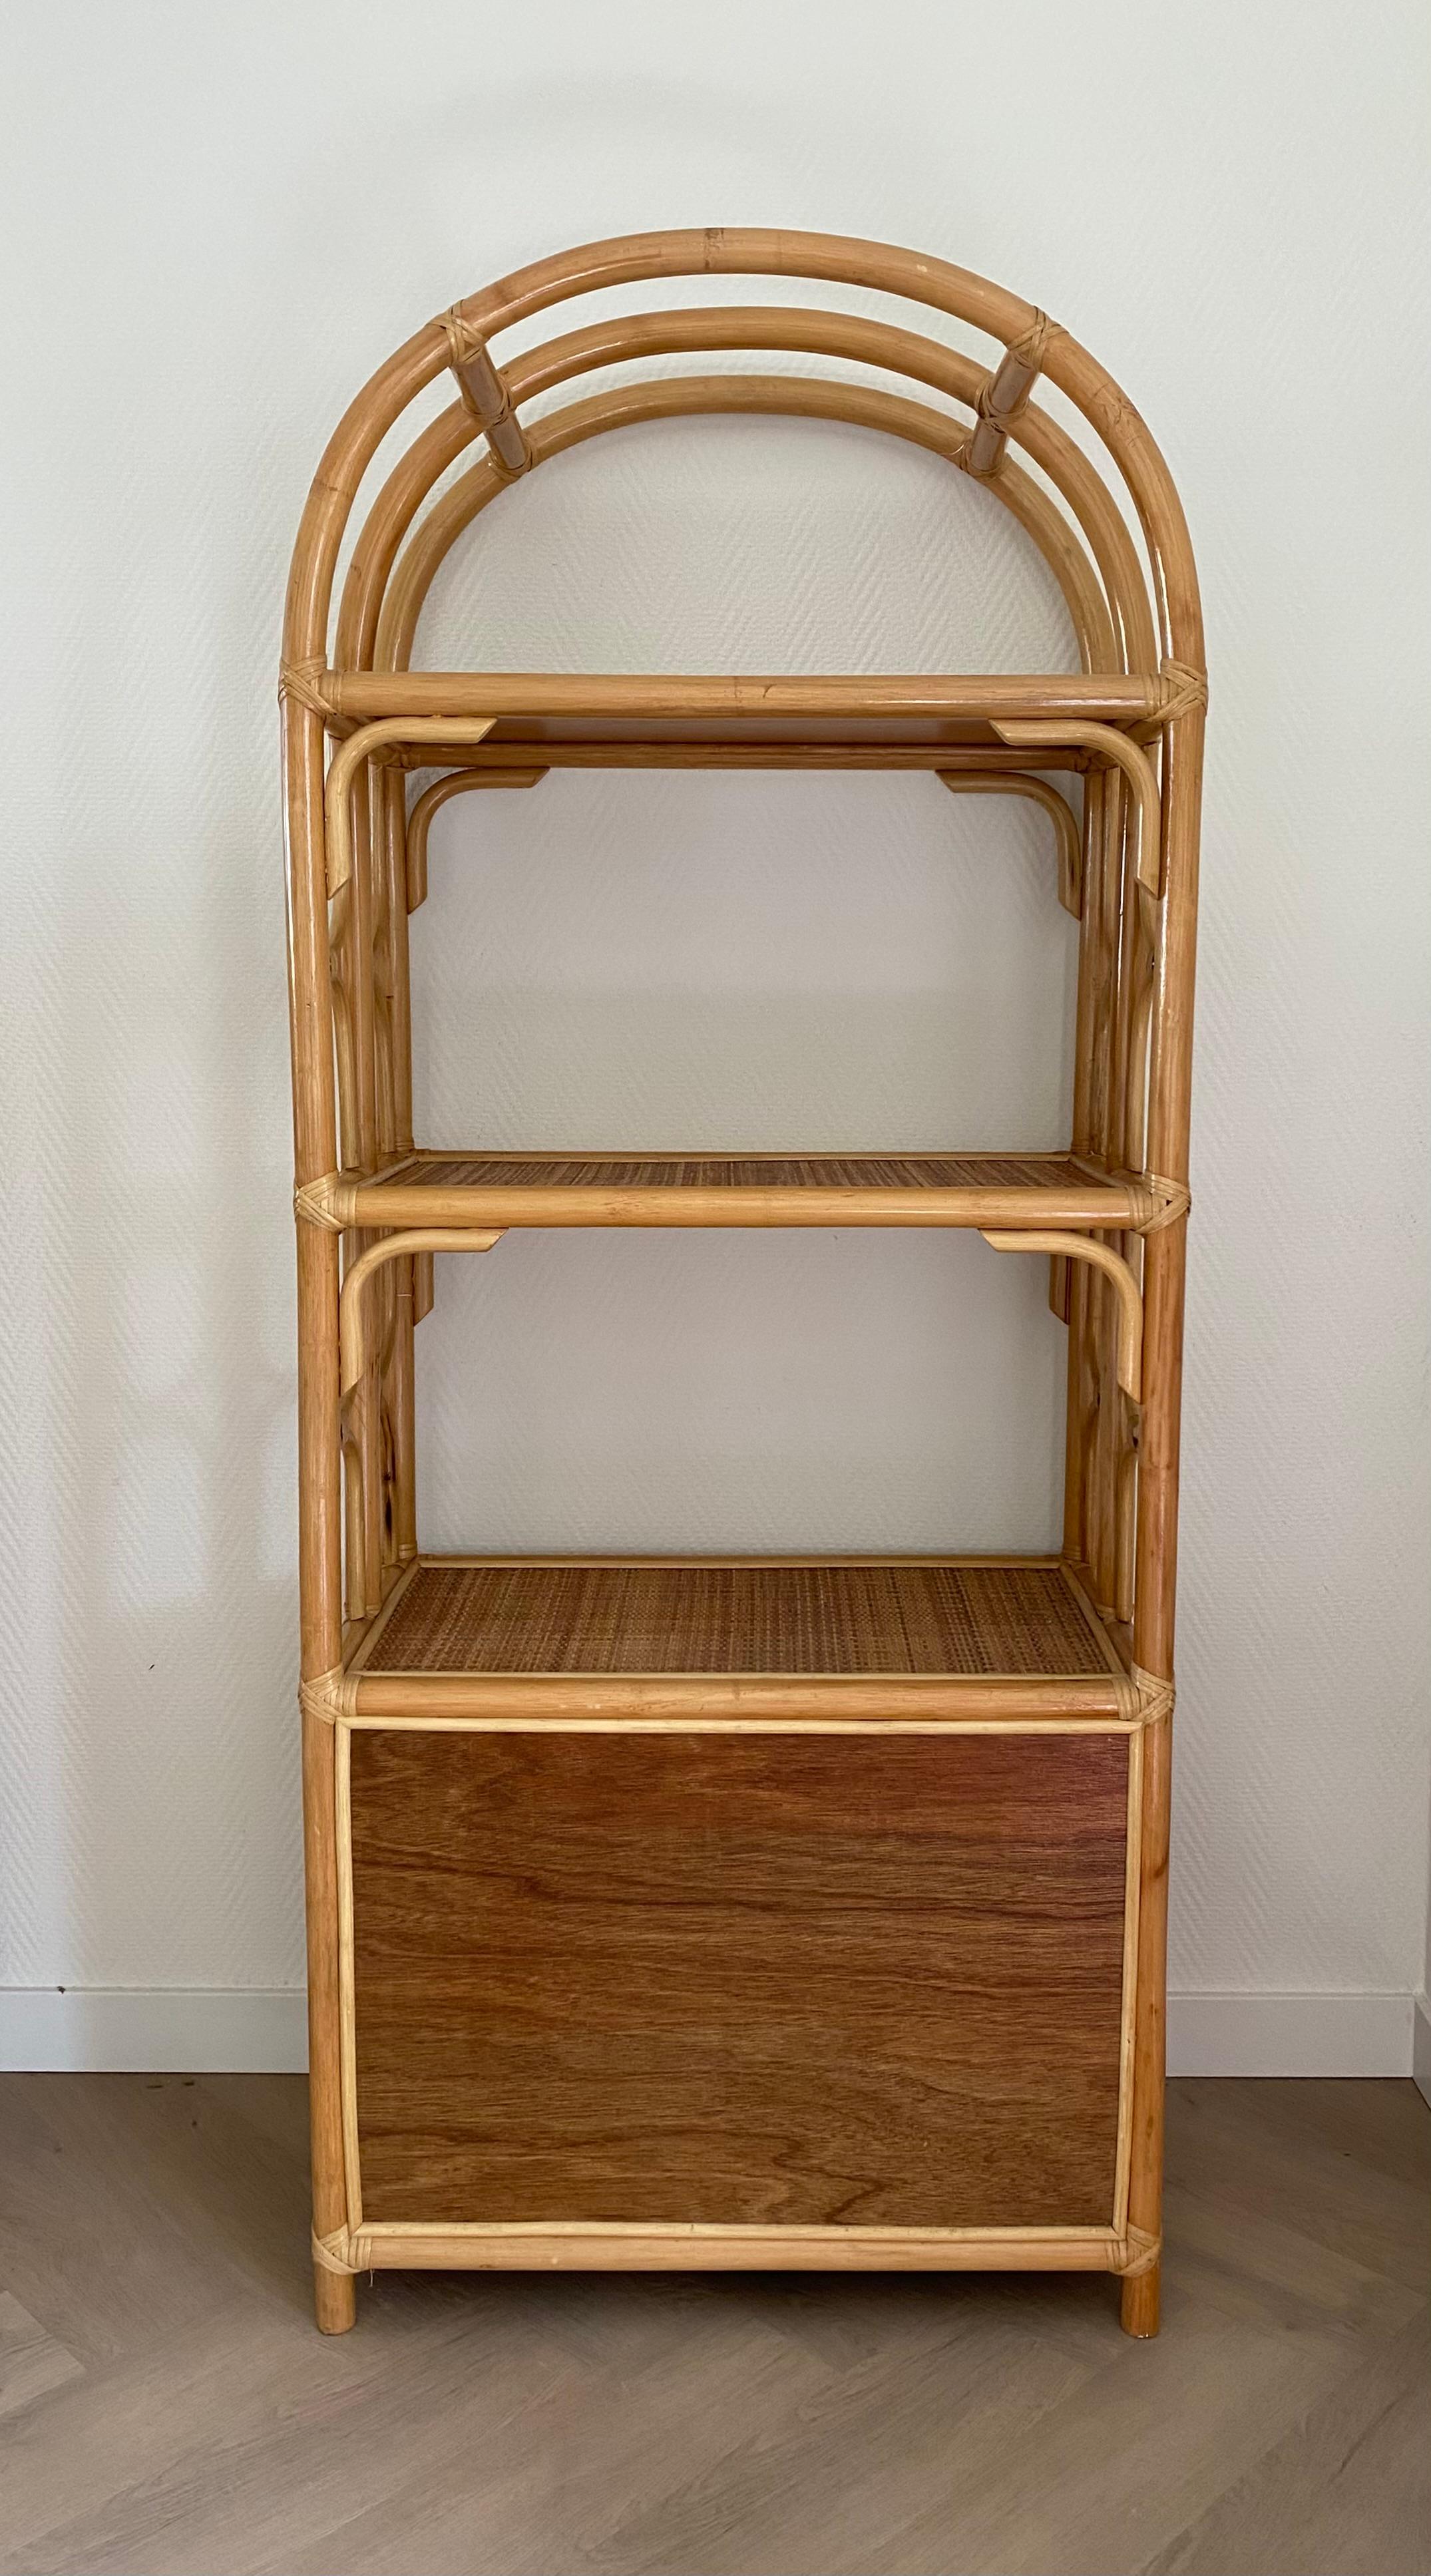 Vintage Rattan Boho Chic Bookcase, Cabinet with doors Ca. 1970s For Sale 4